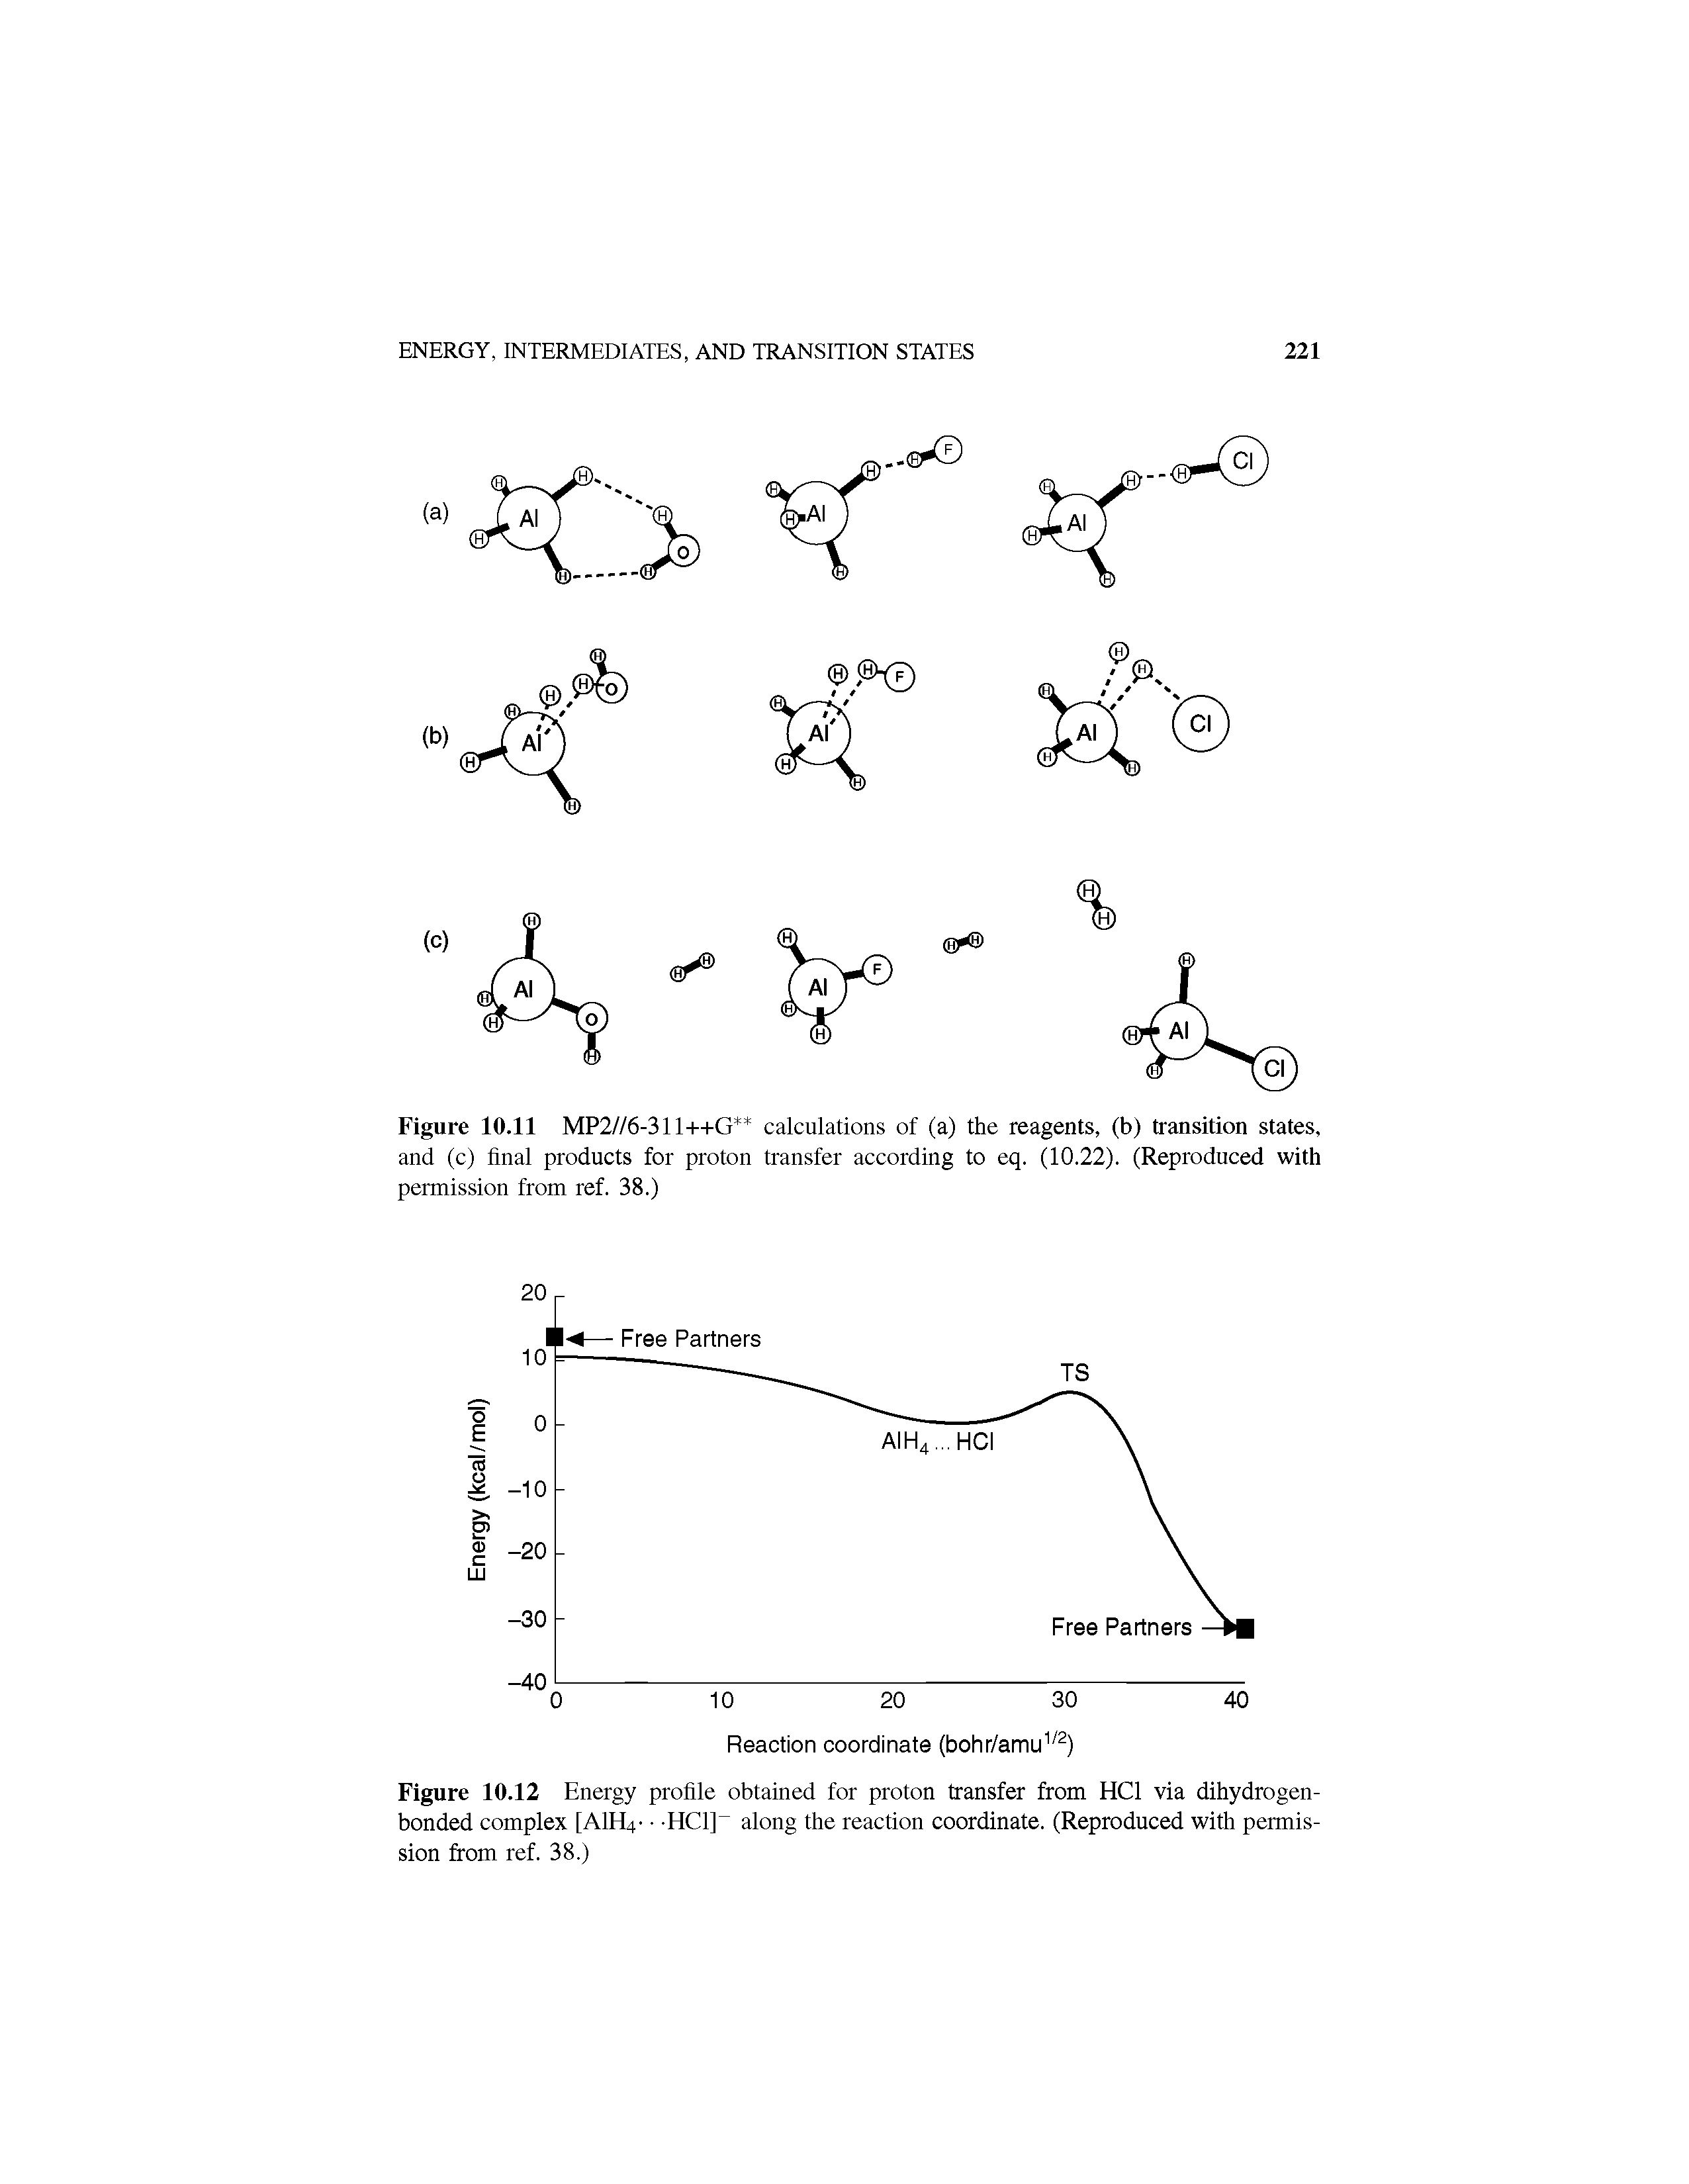 Figure 10.12 Energy profile obtained for proton transfer from HCl via dihydrogen-bonded complex [A1H4- -HCl] along the reaction coordinate. (Reproduced with permission from ref. 38.)...